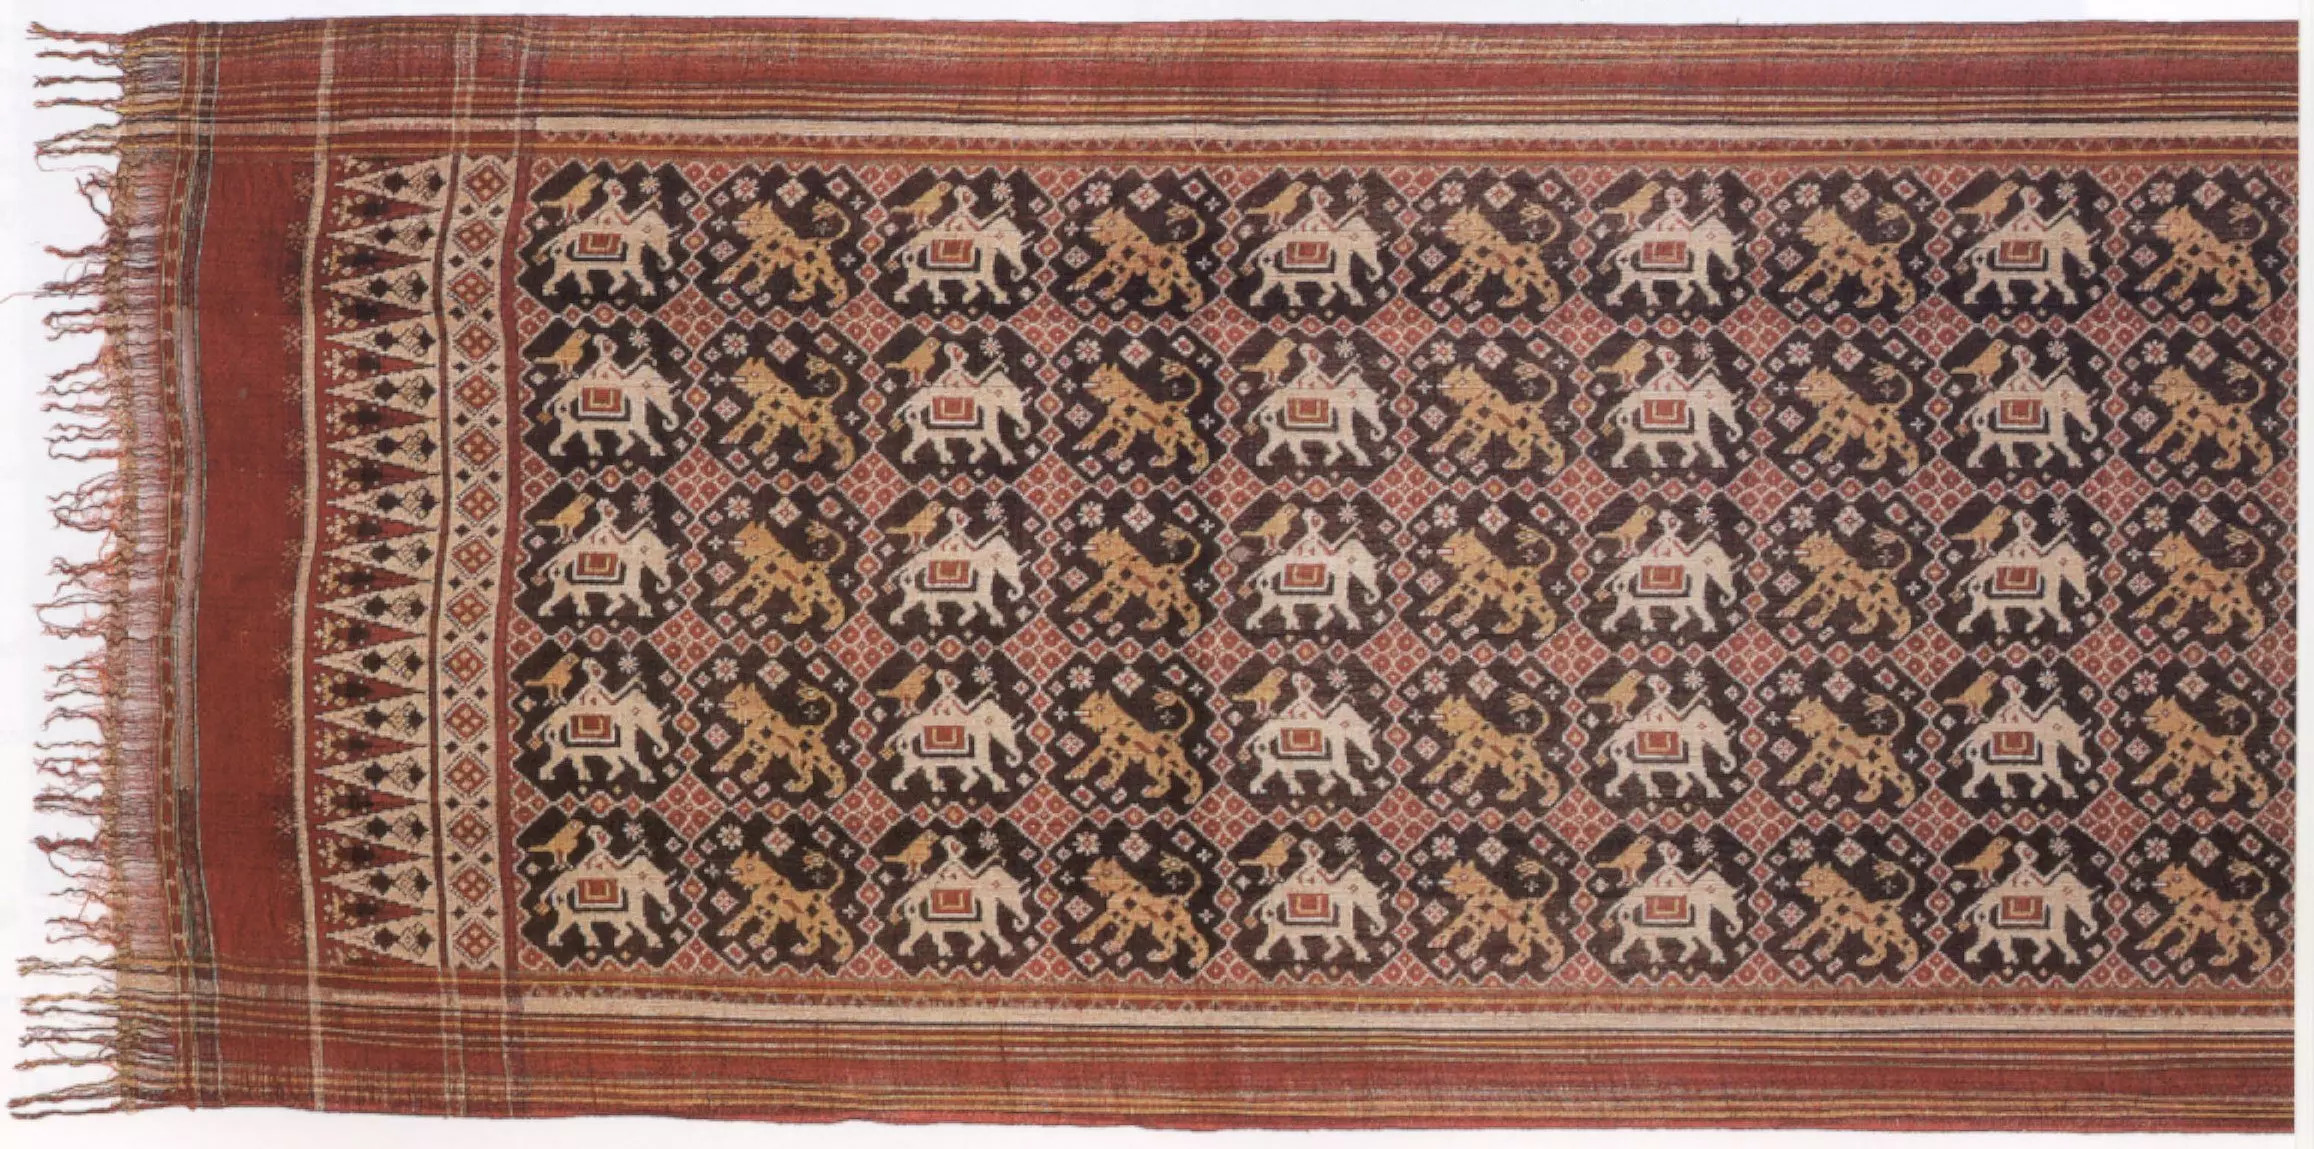 &#39;Patola&#39;_(ritual_heirloom_cloth)_from_Gujarat,_India,_late_18th_or_early_19th_century